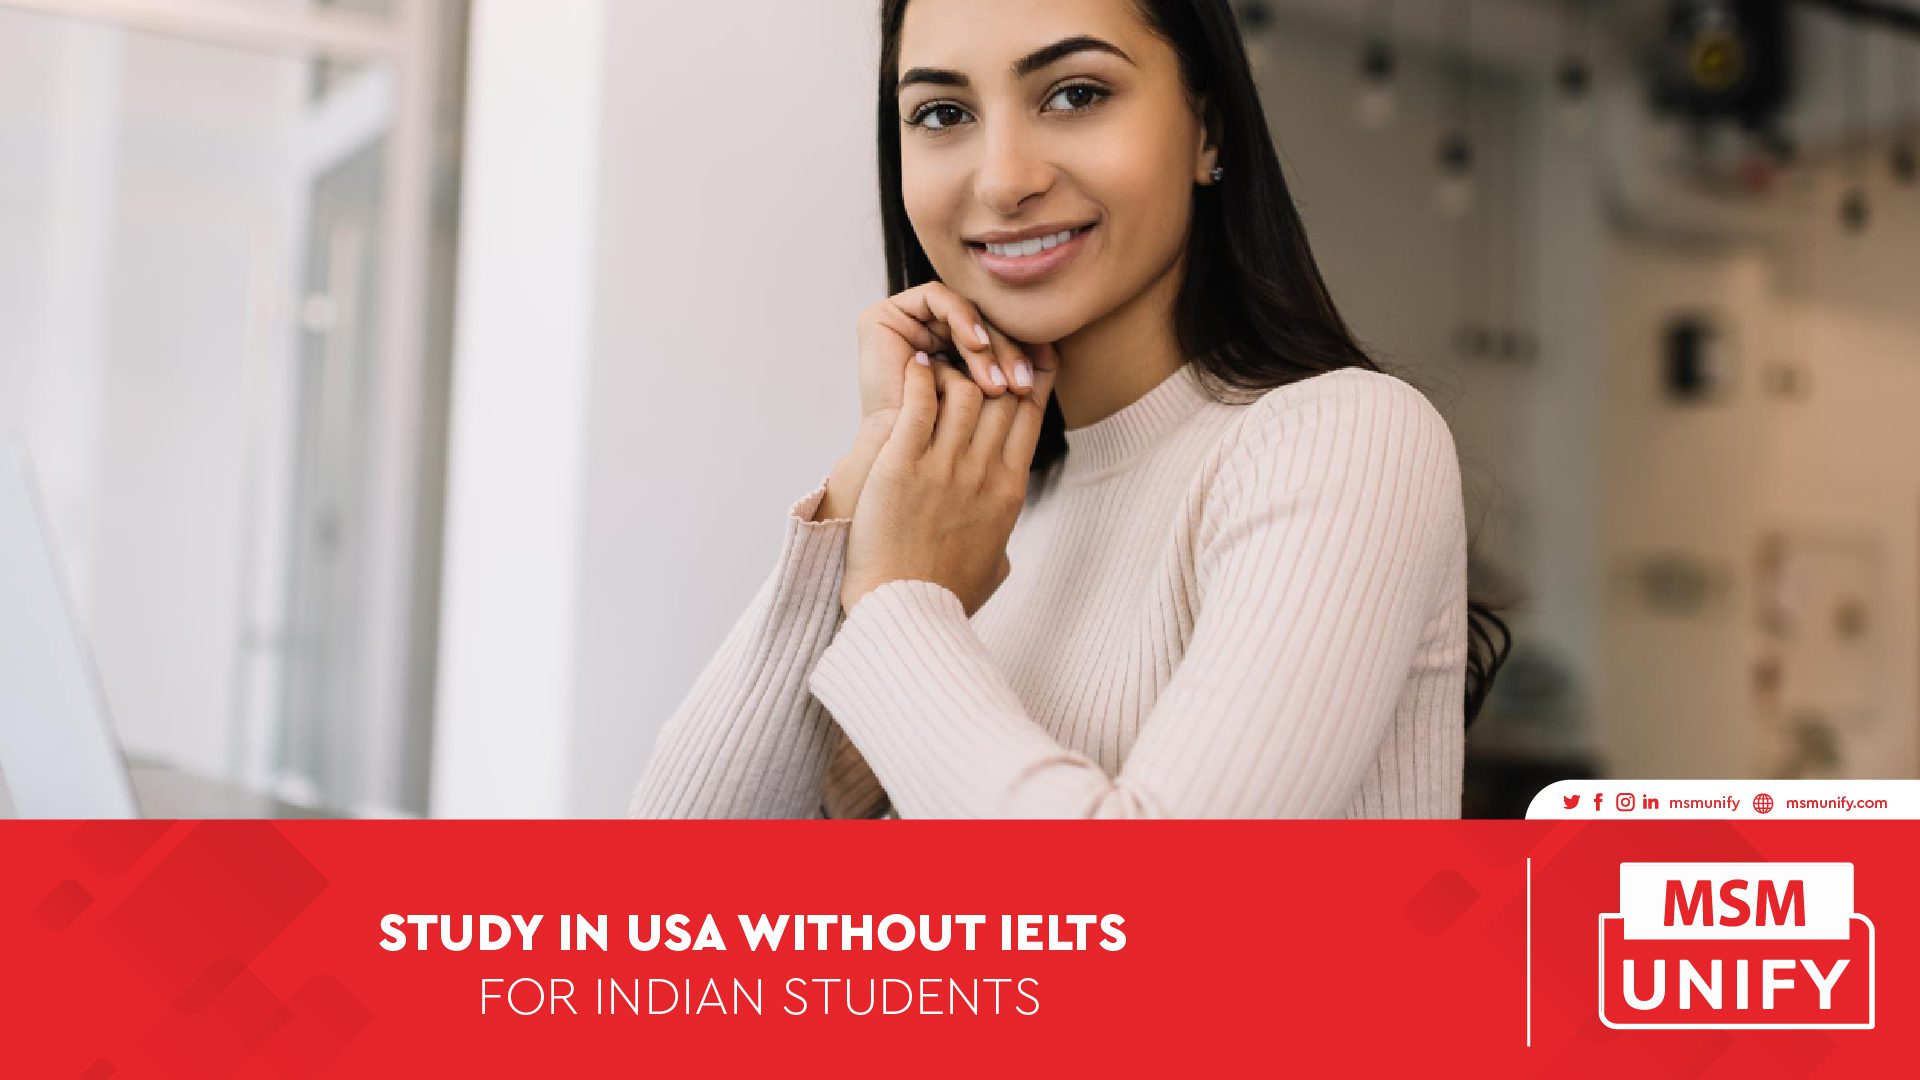 011623 MSM Unify Study in USA Without IELTS for Indian students 01